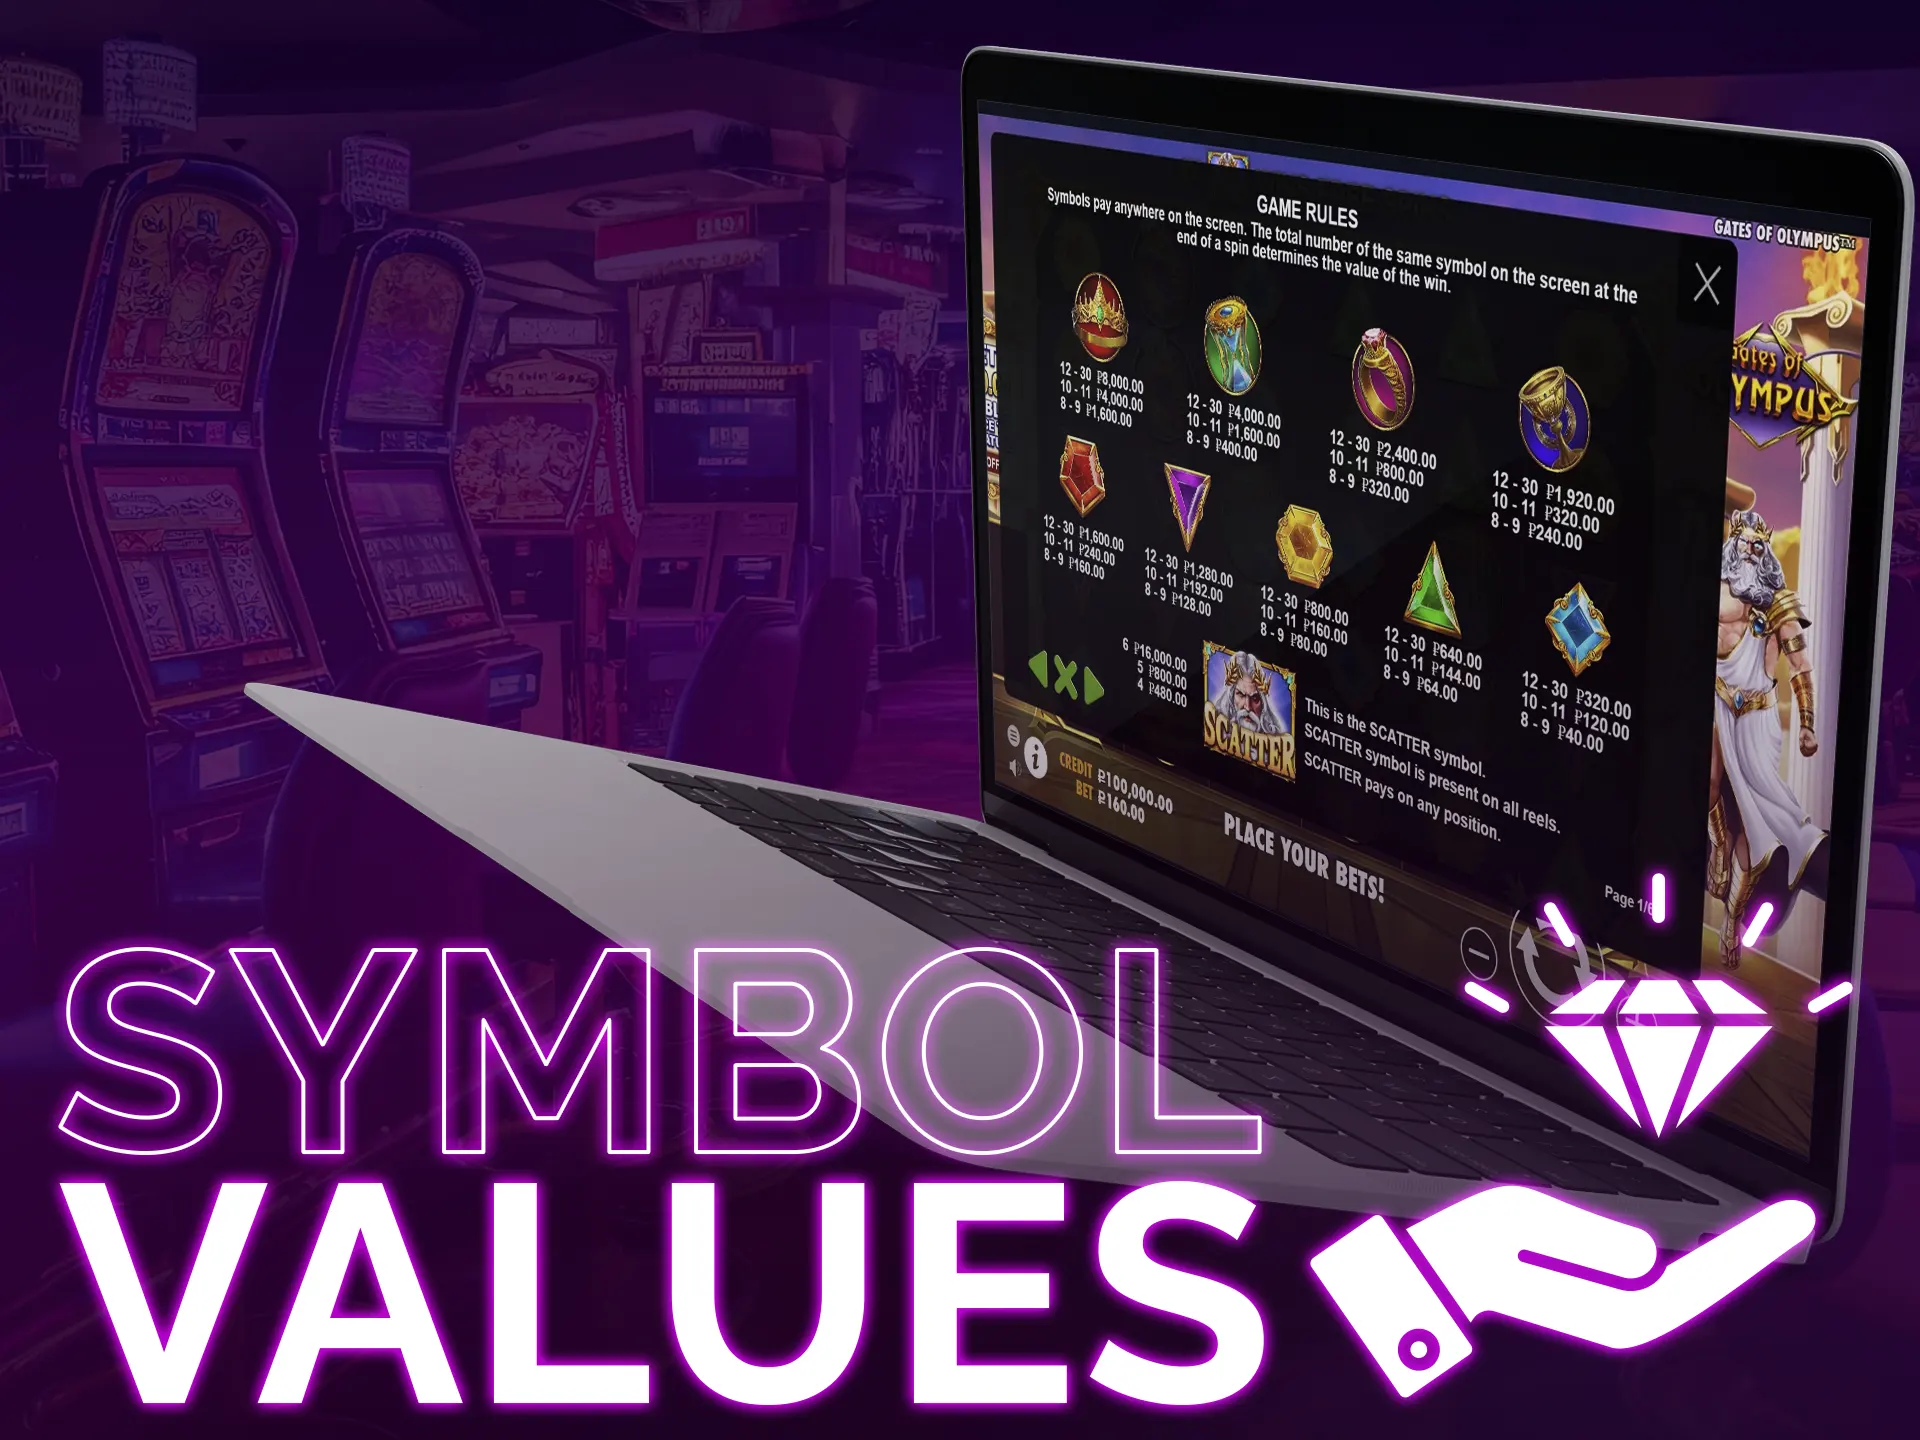 Symbols in slots vary in values, affecting win sizes.